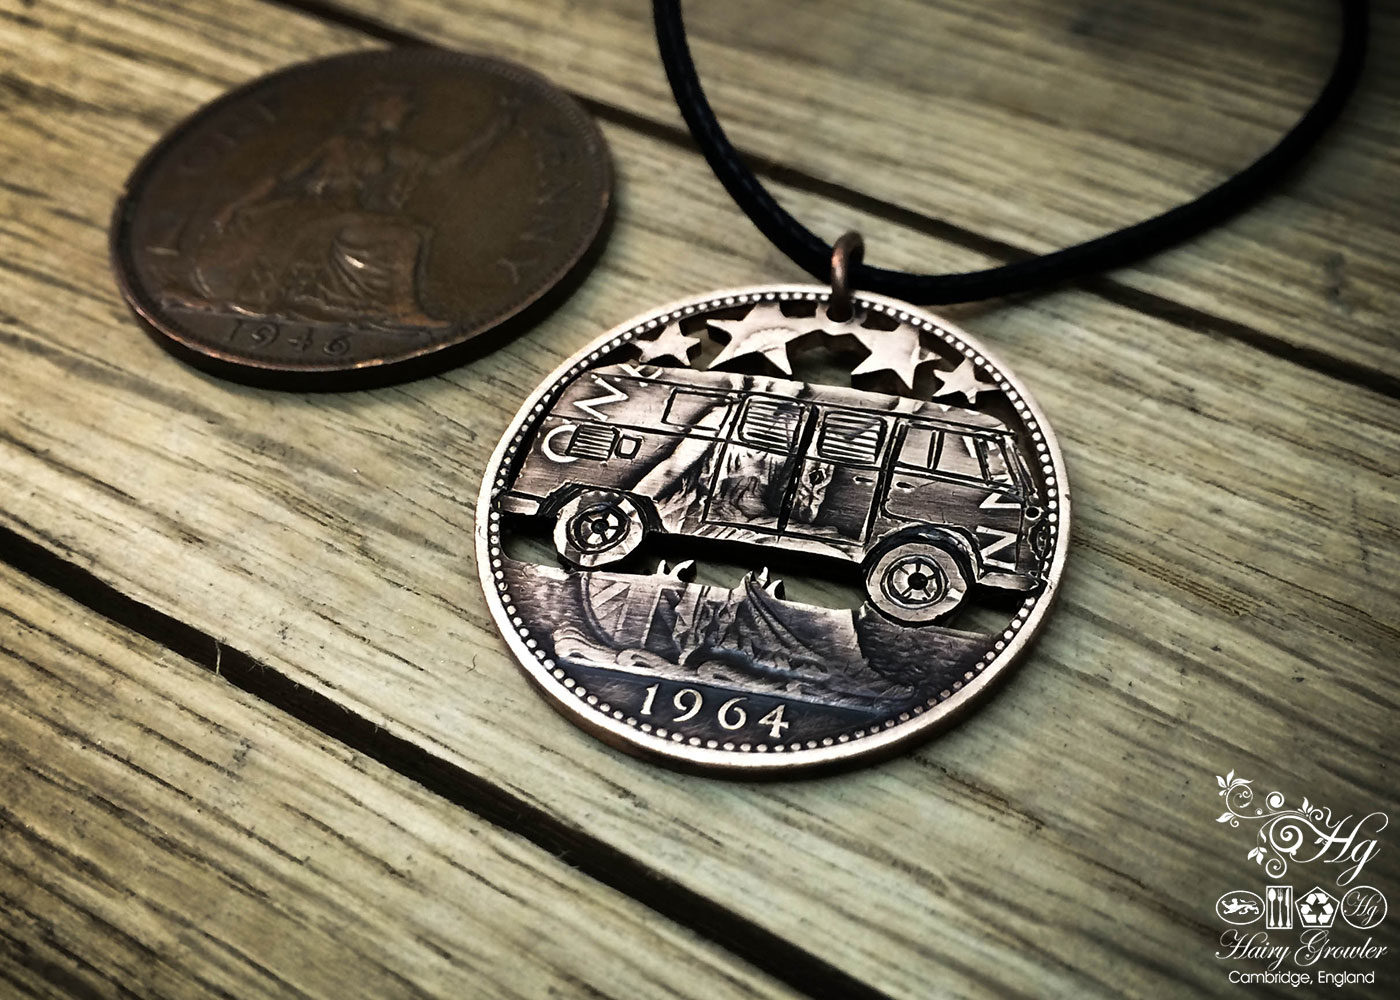 Handmade and upcycled coin VW camper-van pendant necklace